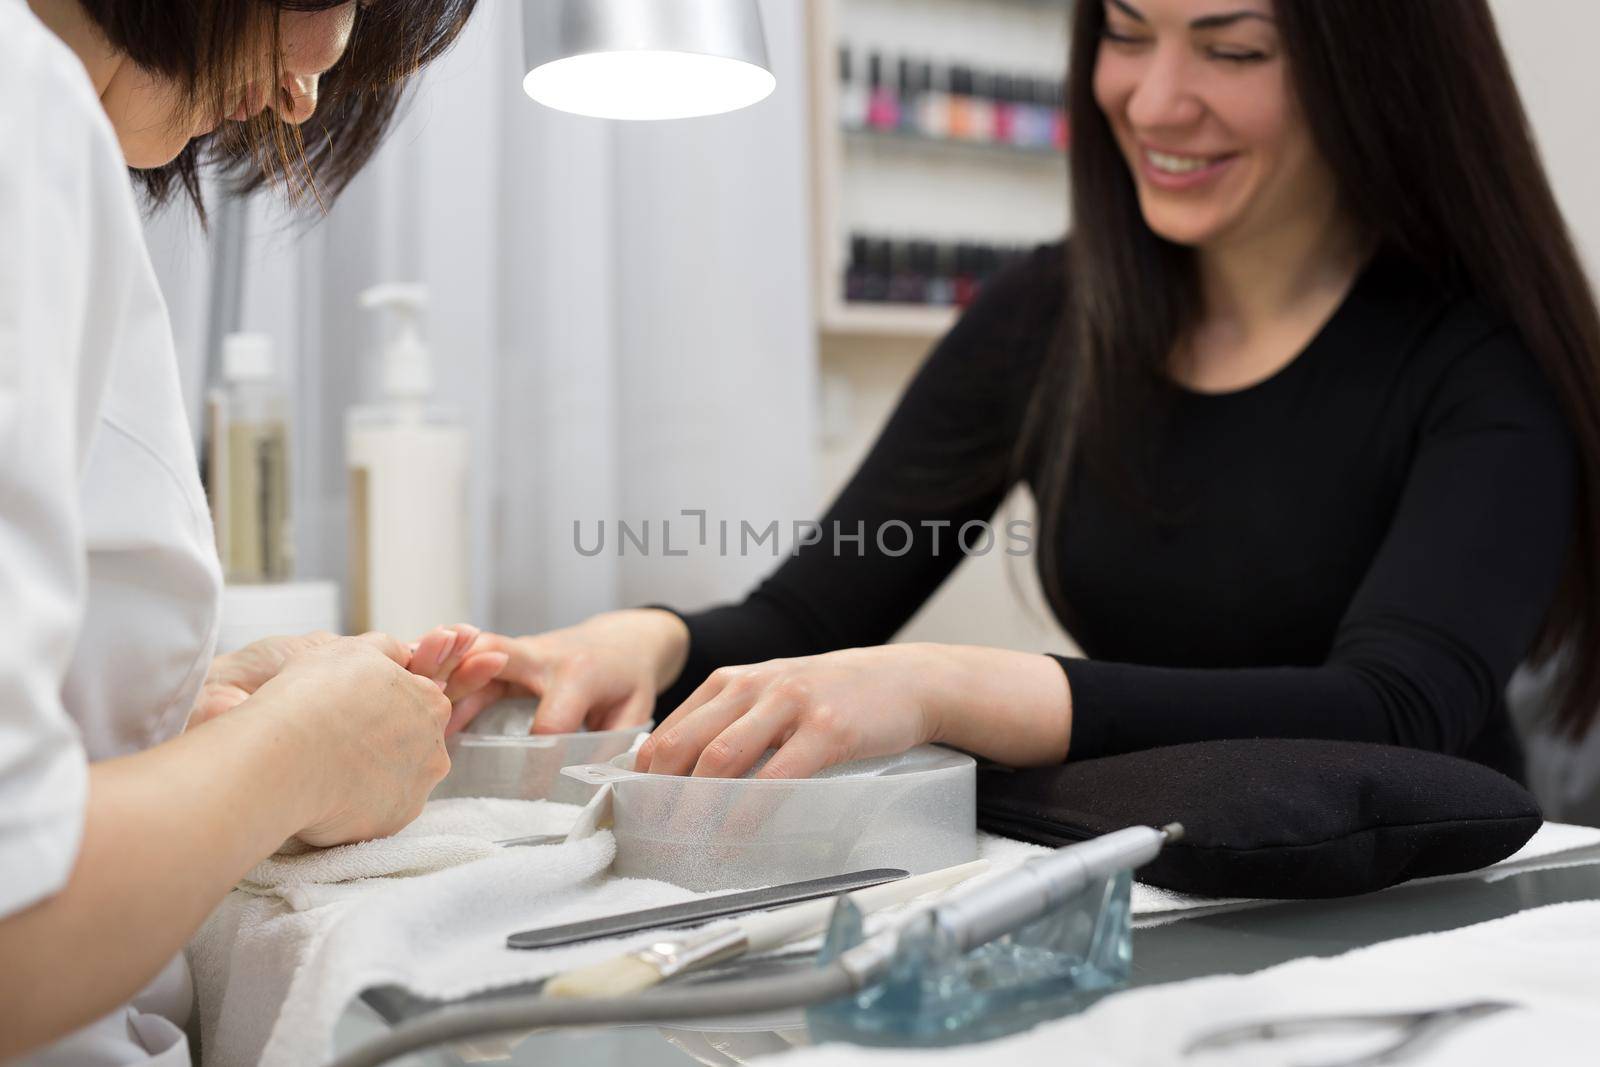 Nail Salon. Closeup Of Female Hand With Healthy Natural Nails Getting Nail Care Procedure. Hands Removing Cuticles With Professional Nail Tool, Metal Clippers. Beauty Manicure. by StudioPeace